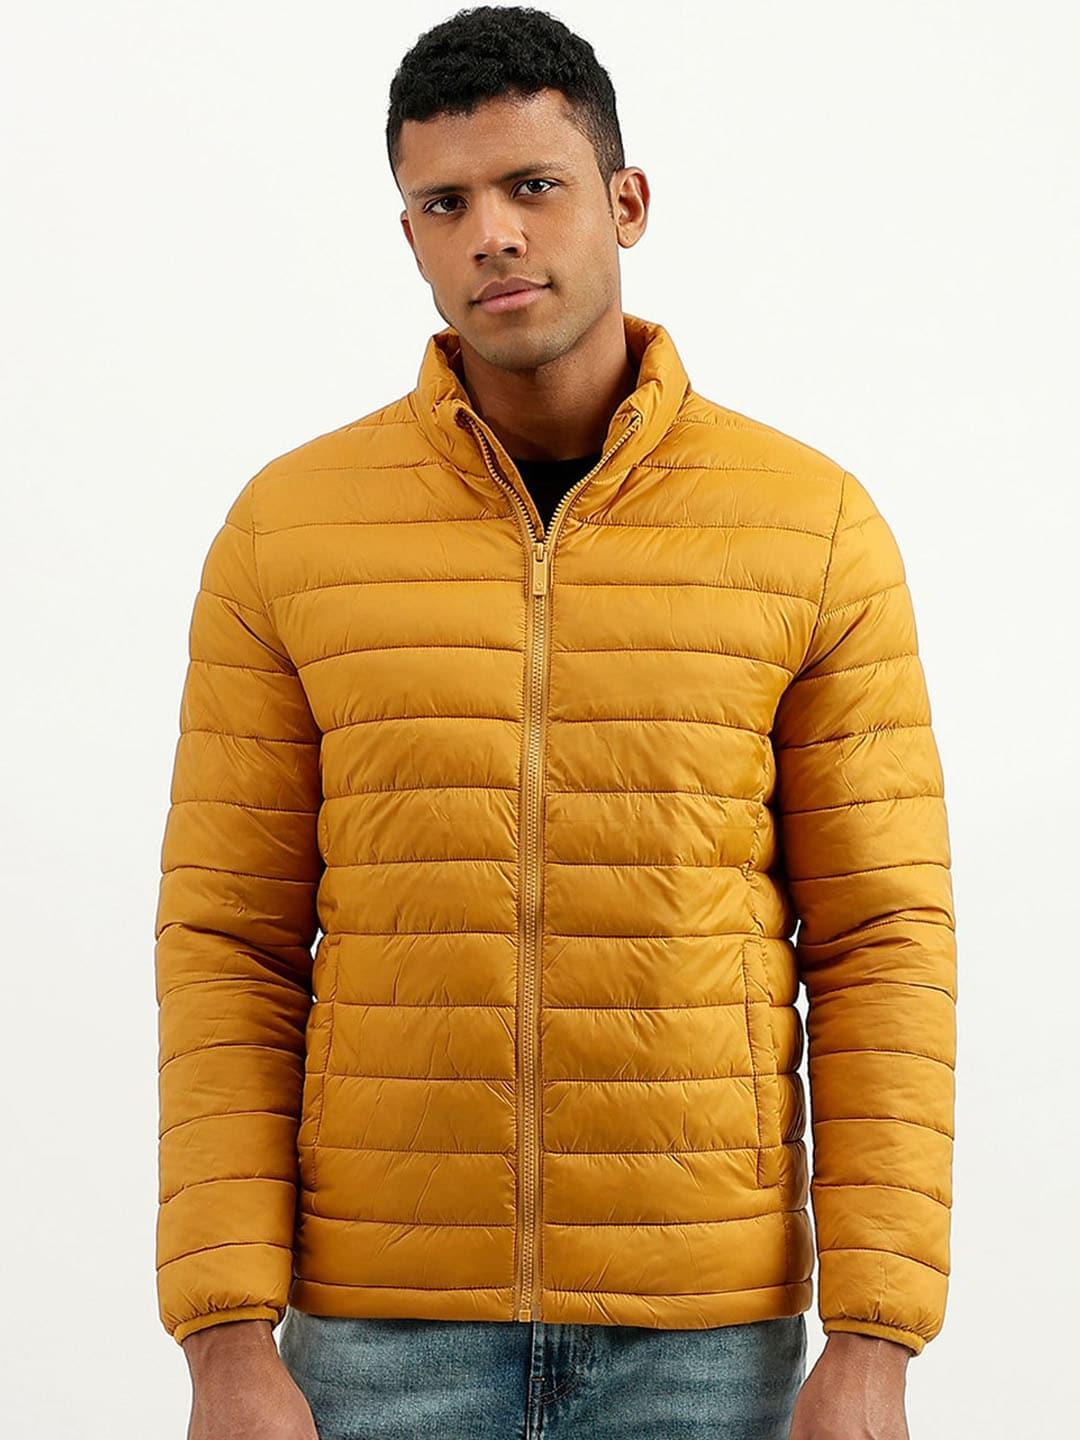 united-colors-of-benetton-men-yellow-puffer-jacket